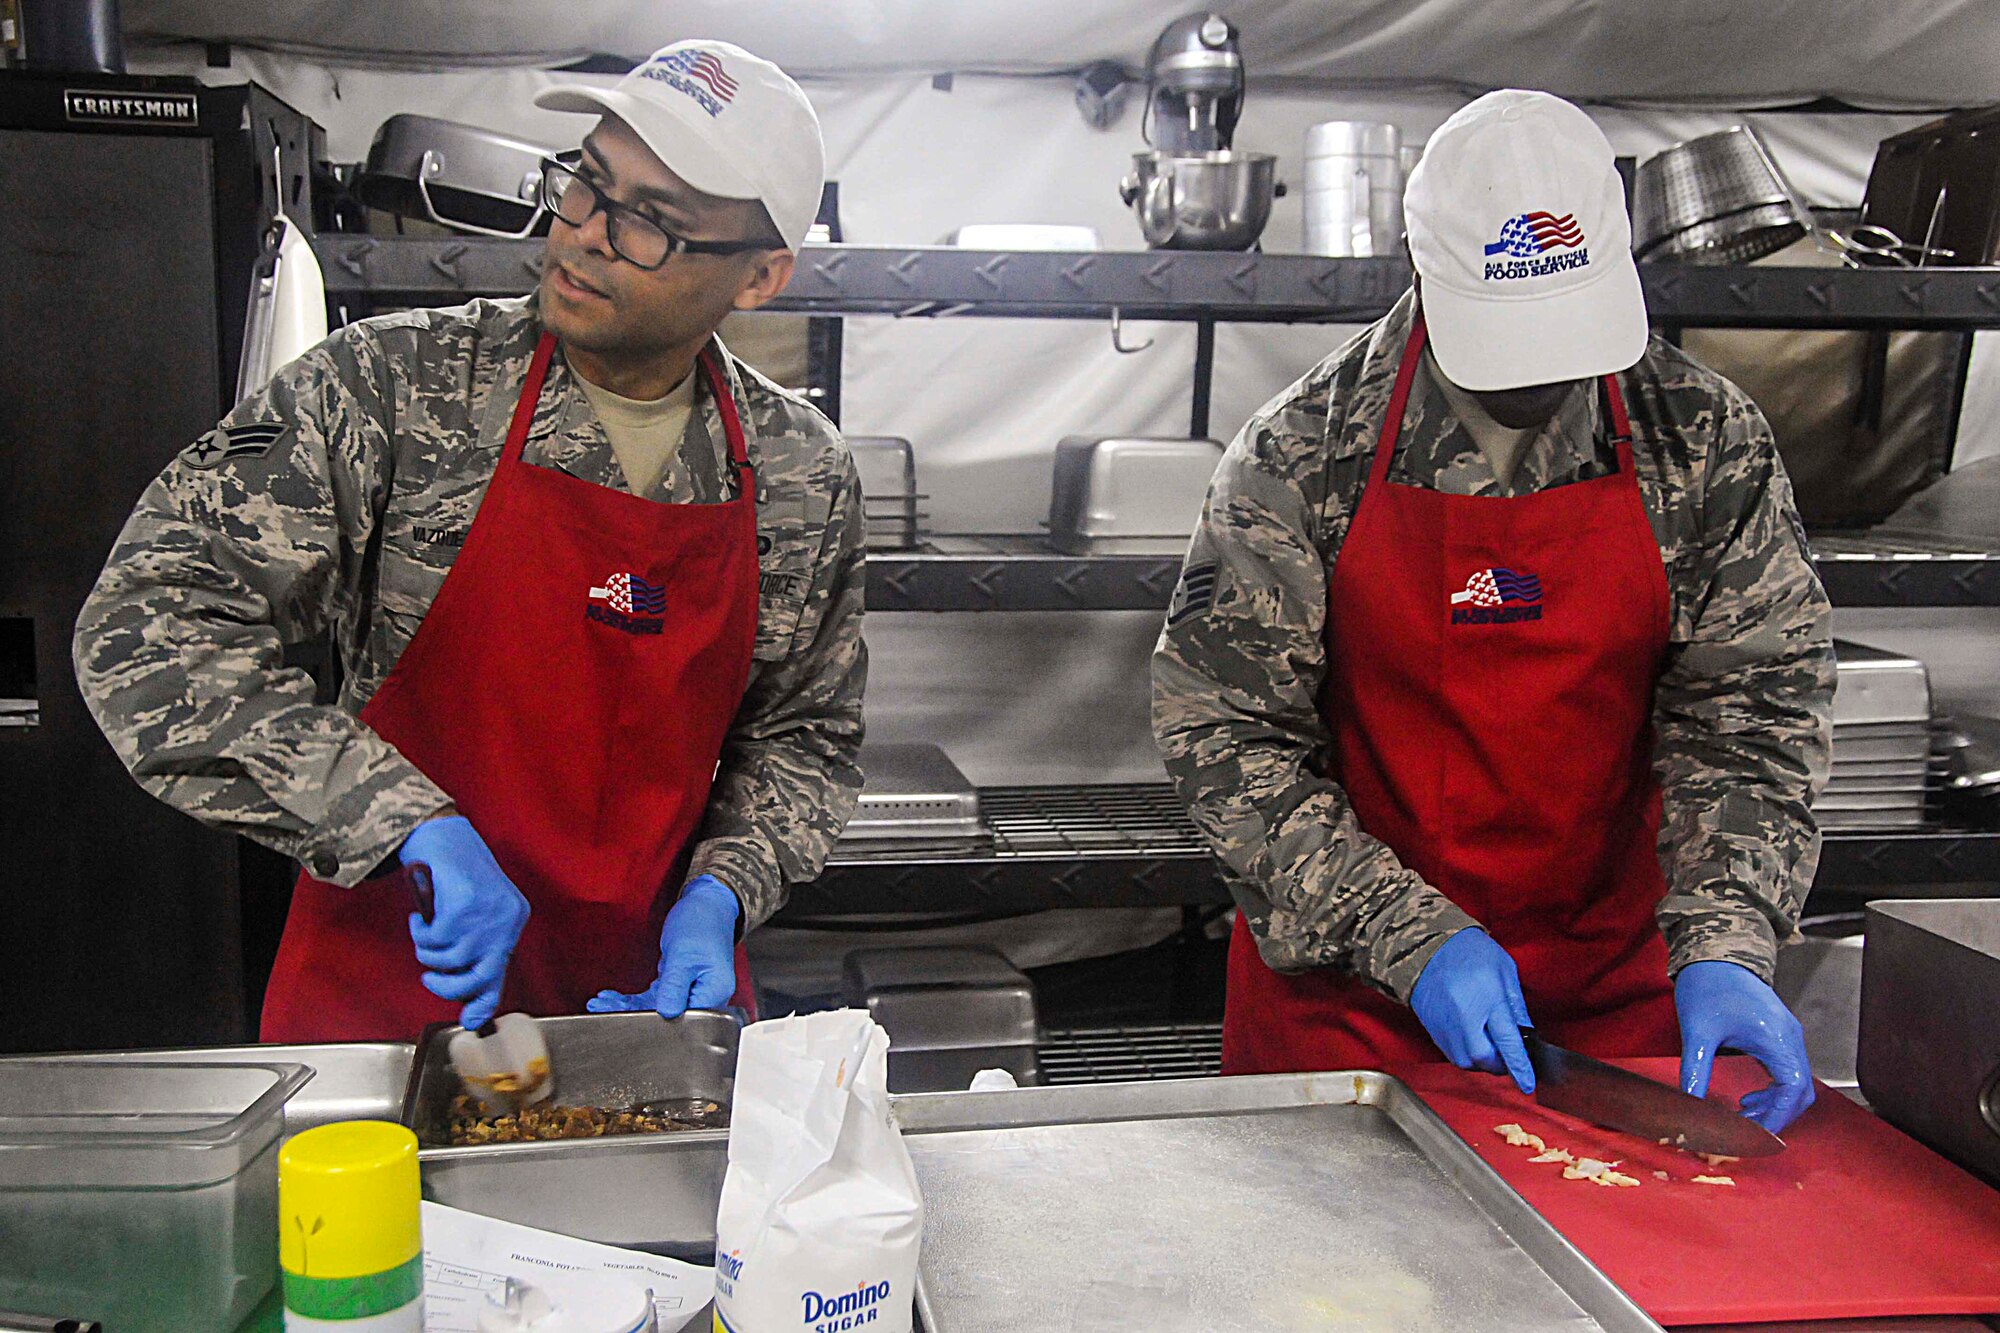 Participants prepare a meal during this year's Hennessy competition held at the Force Support Silver Flag training facility on Dobbins Air Reserve Base Feb. 9-12. Each year a trophy is awarded to teams representing the best food service programs in the Air Force and is based on the entire scope of an installation's food service program. (U.S. Air Force photo/Senior Airman Justin Clayvon)